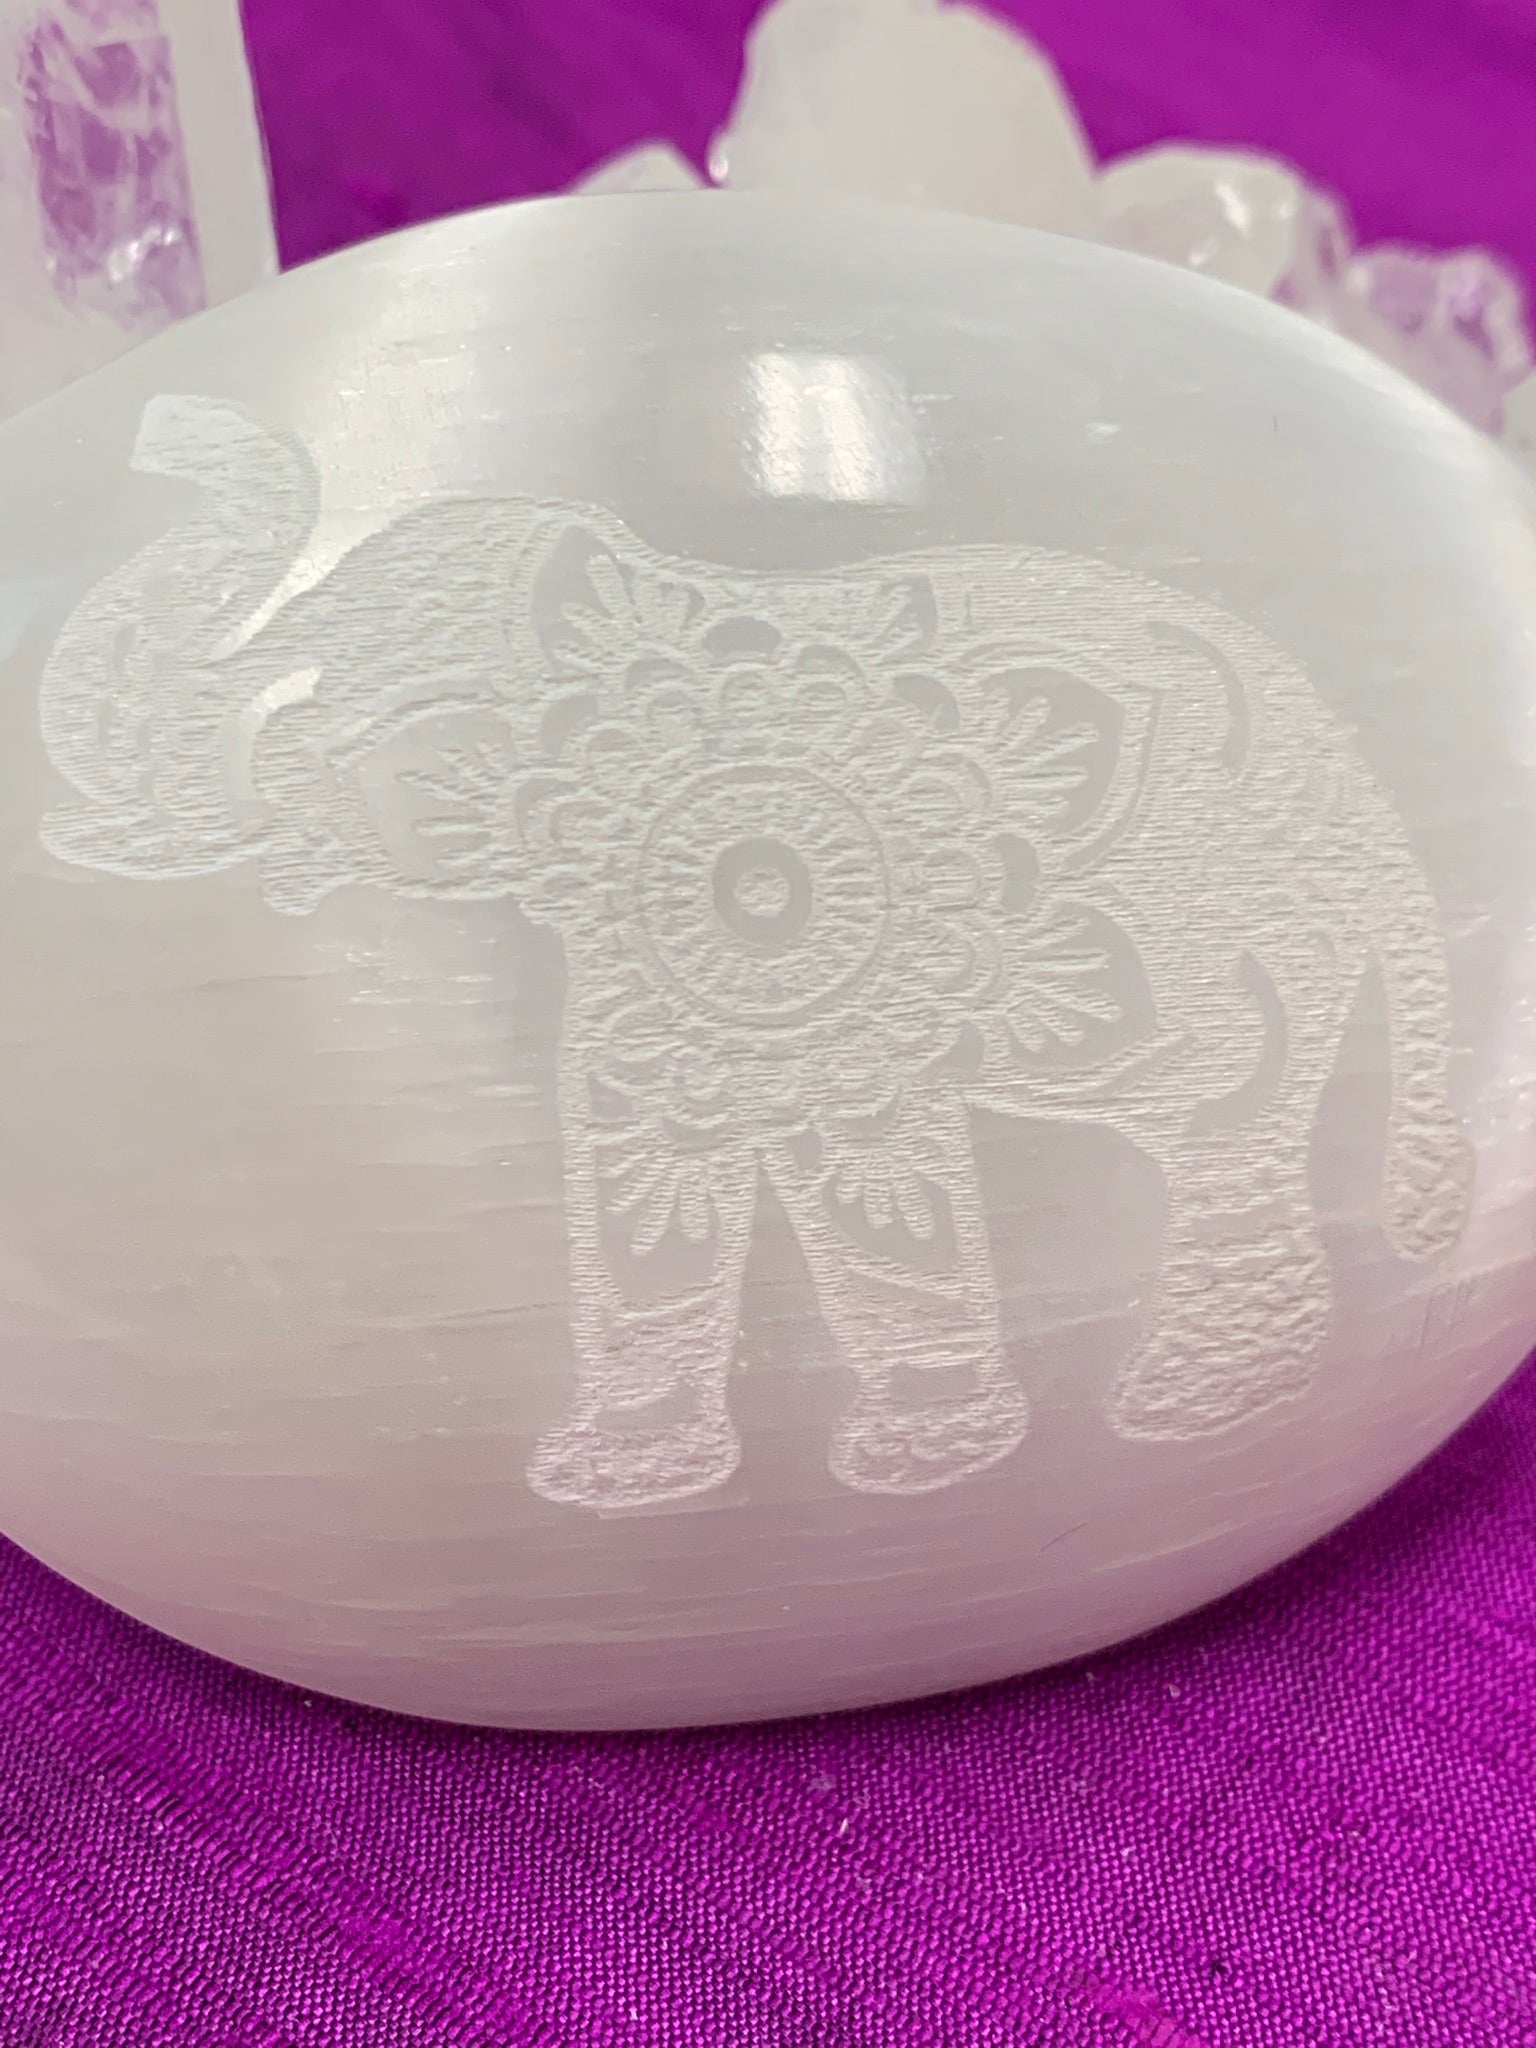 Close-up view of the ornately designed elephant etched on a smooth, polished selenite palm stone. The selenite stone can range from translucent to milky white in color. The weight of the stone varies, but the average weight is 4.2 oz and the average size is 3"x2.5", the perfect size to hold in the palm of your hand. These selenite stones are handmade and ethically sourced - workers are paid living wages.